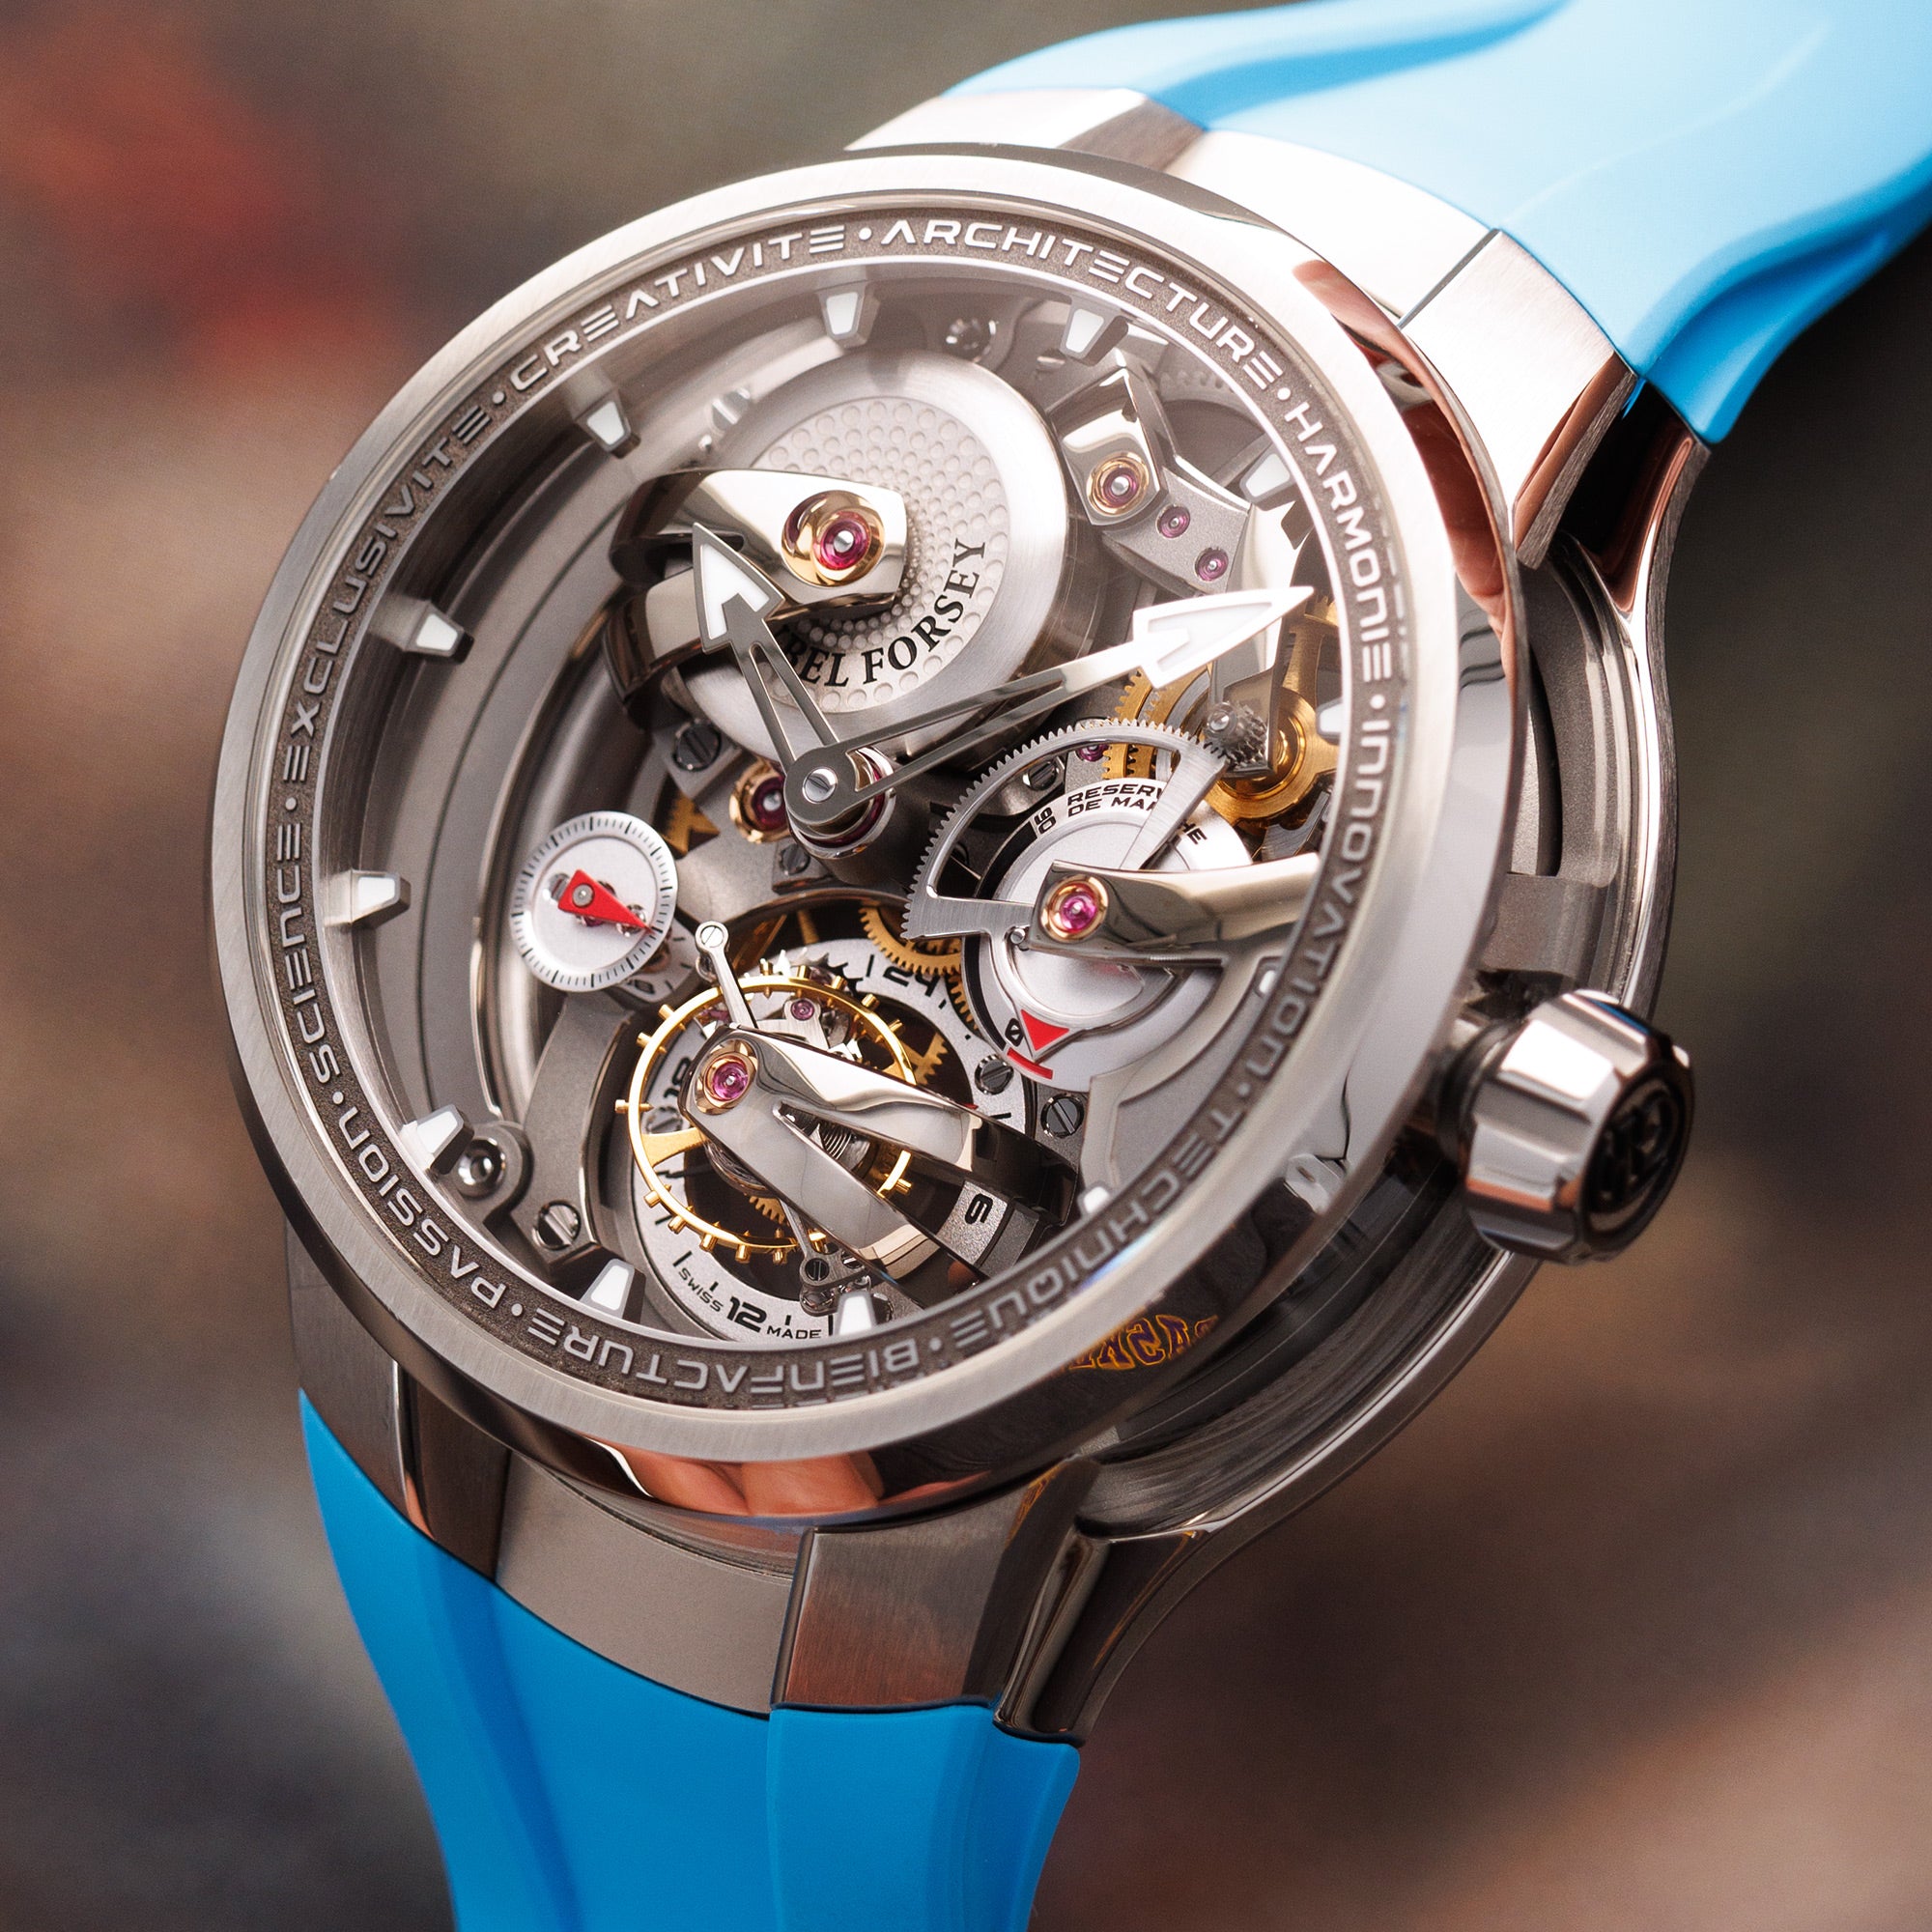 Greubel Forsey - Greubel Forsey Tourbillon 24 Seconds Architecture - The Keystone Watches